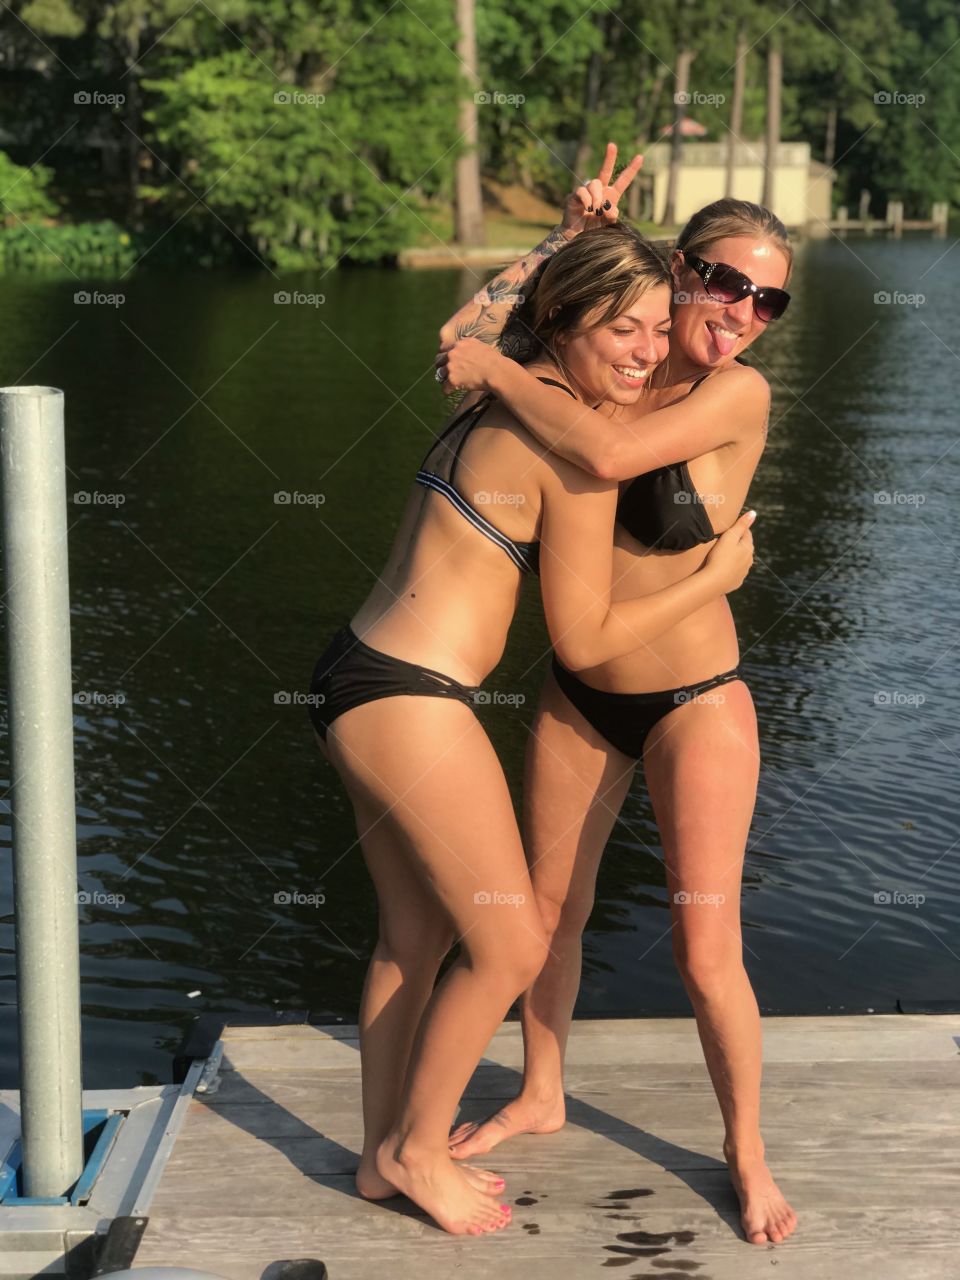 Mommy daughter lake date   Tandilee23